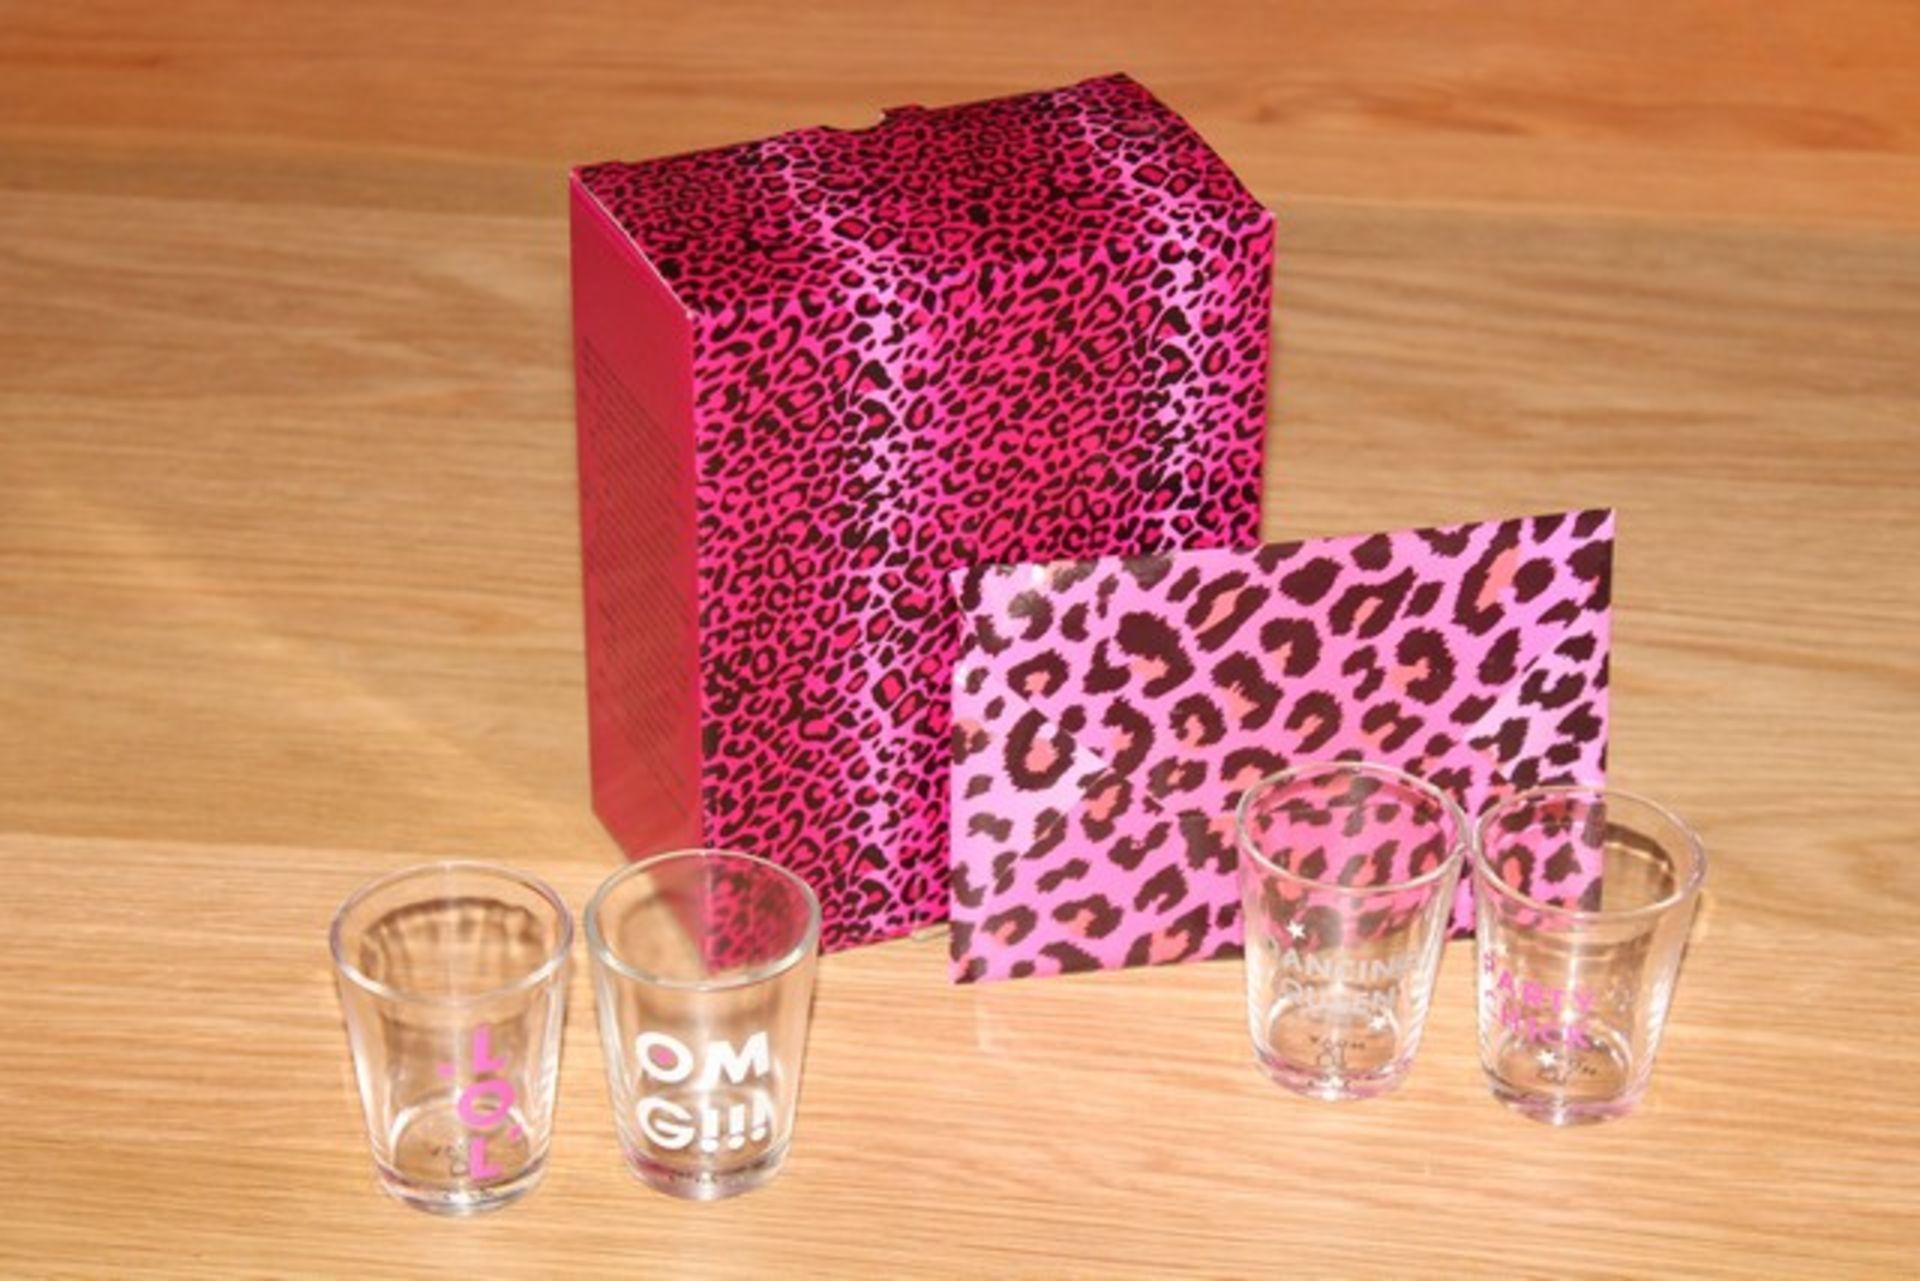 12 x BOXED BRAND NEW SHOT GLASS GAMES (26.1.15)  *PLEASE NOTE THAT THE BID PRICE IS MULTIPLIED BY